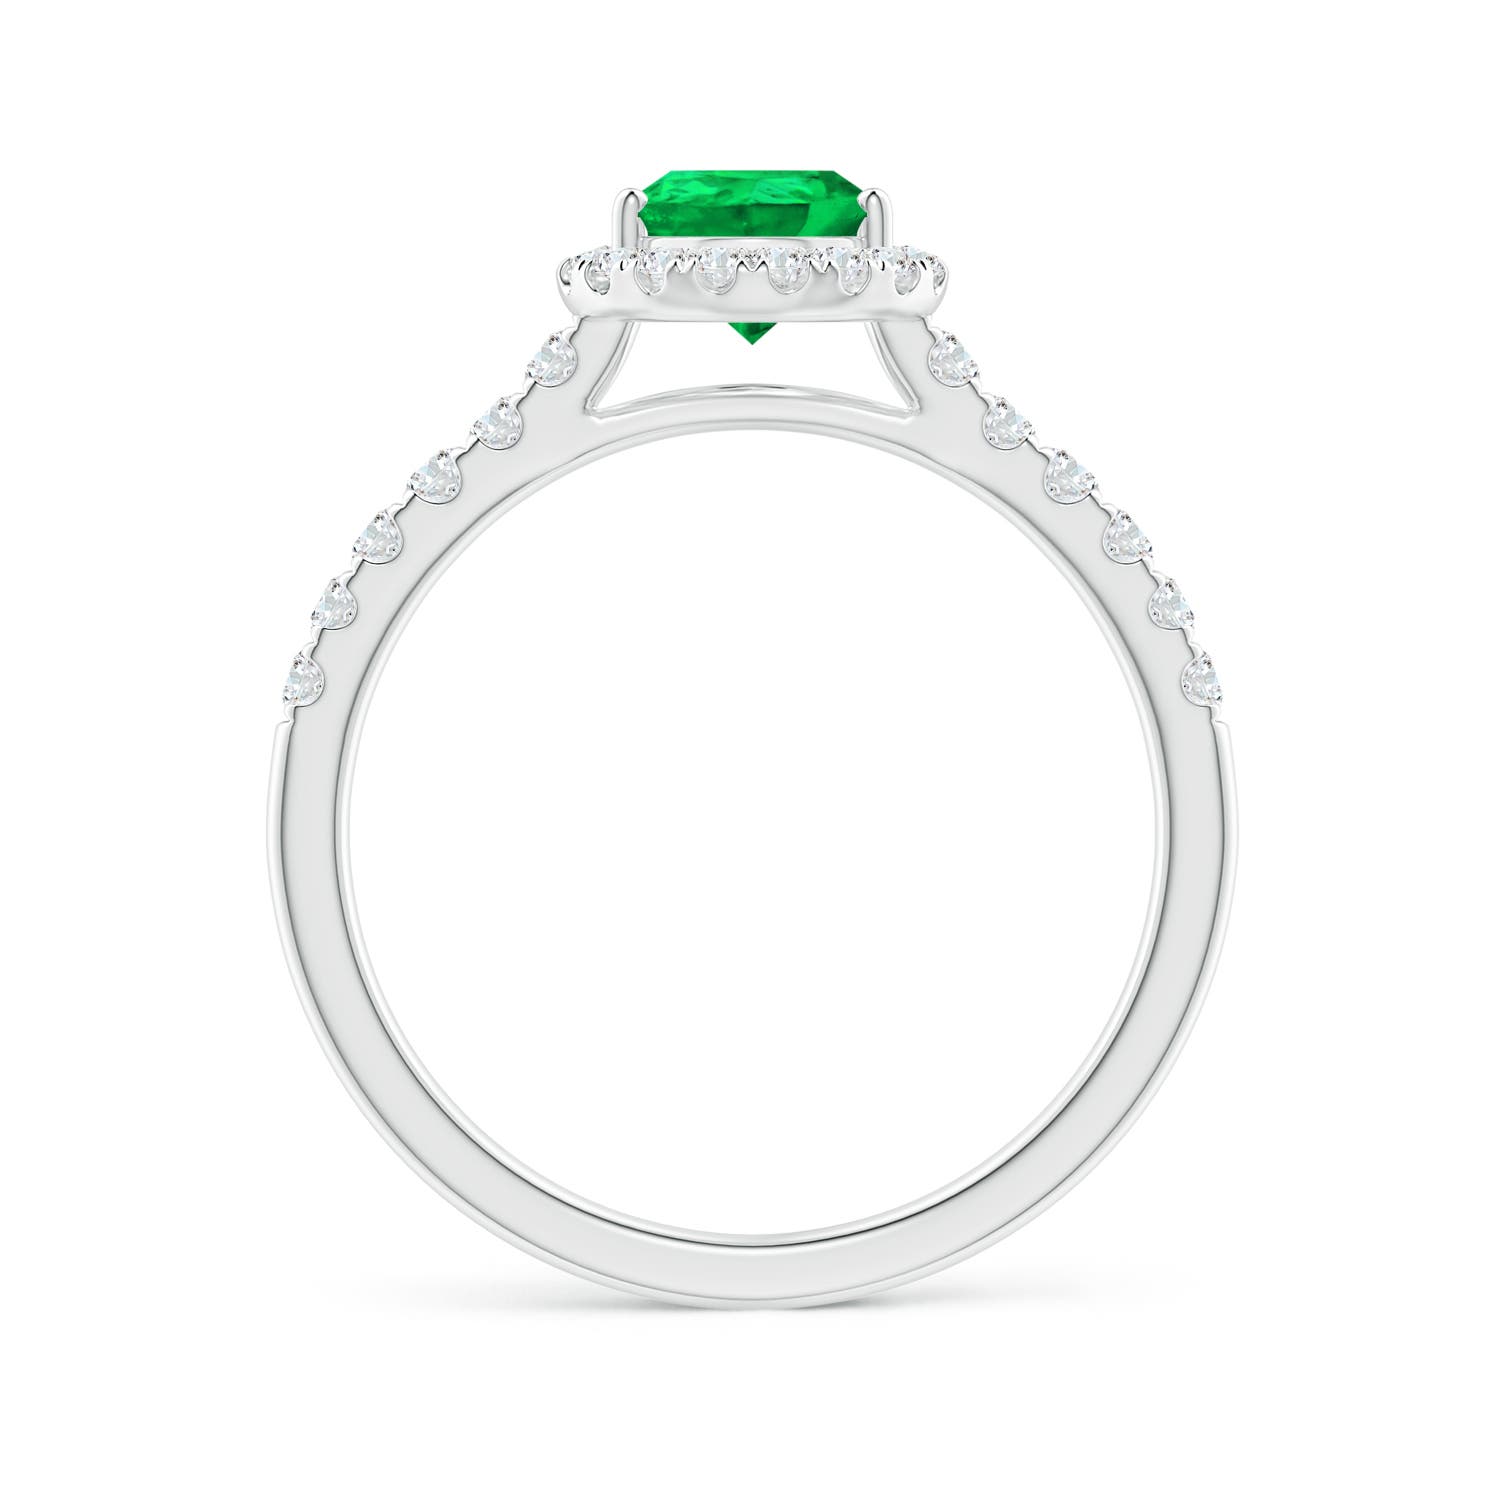 AAA - Emerald / 1.32 CT / 14 KT White Gold